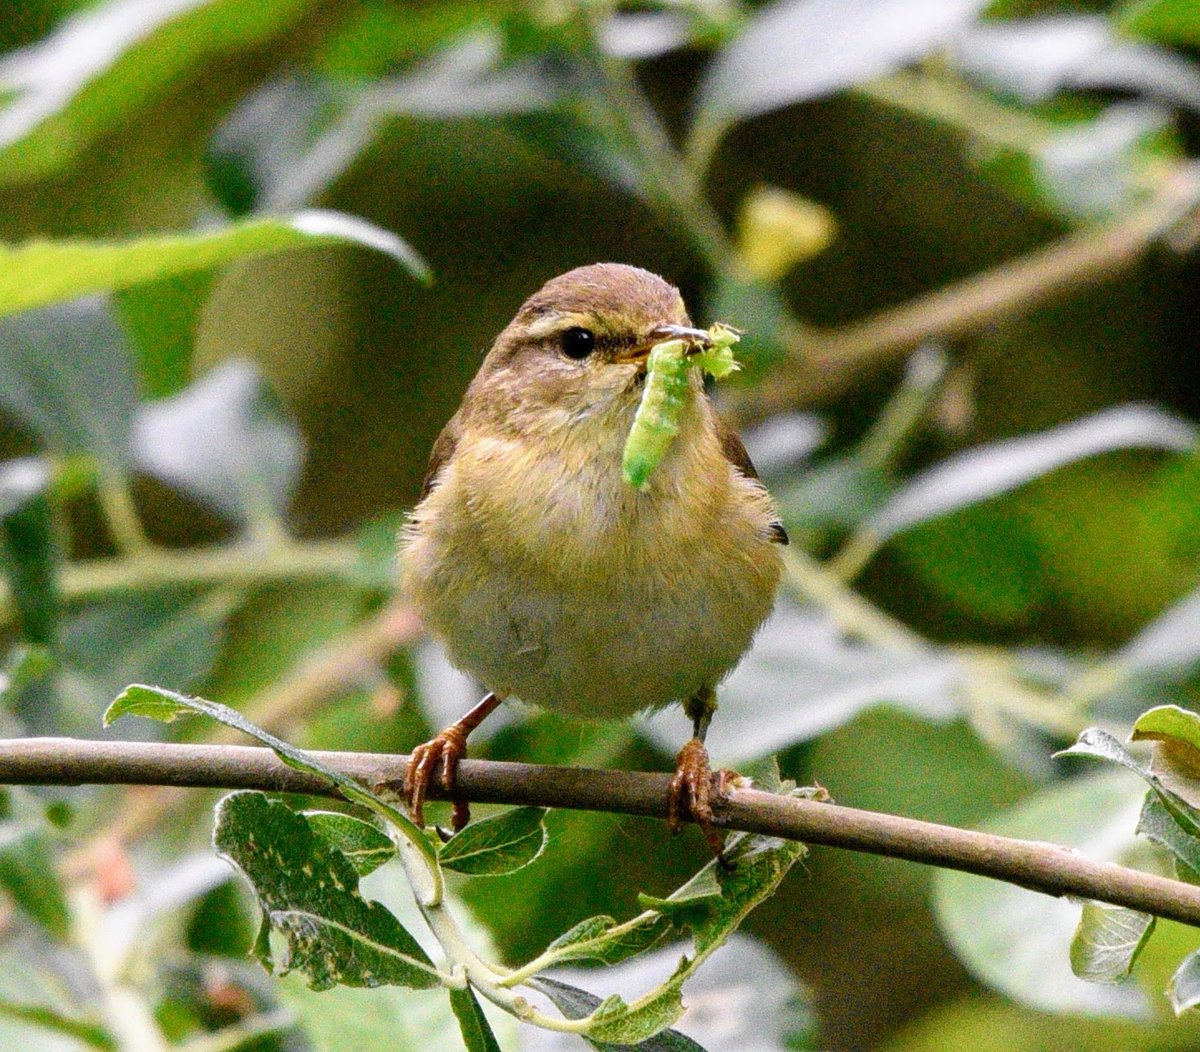 Another from yesterday.. A chiffchaff I think as some warblers look quite similar. I couldn't hear the distinctive chiffchaff call as he/she had a beak full heading to no doubt hungry little mouths back at the nest. #birds #wildlife #NaturePhotography